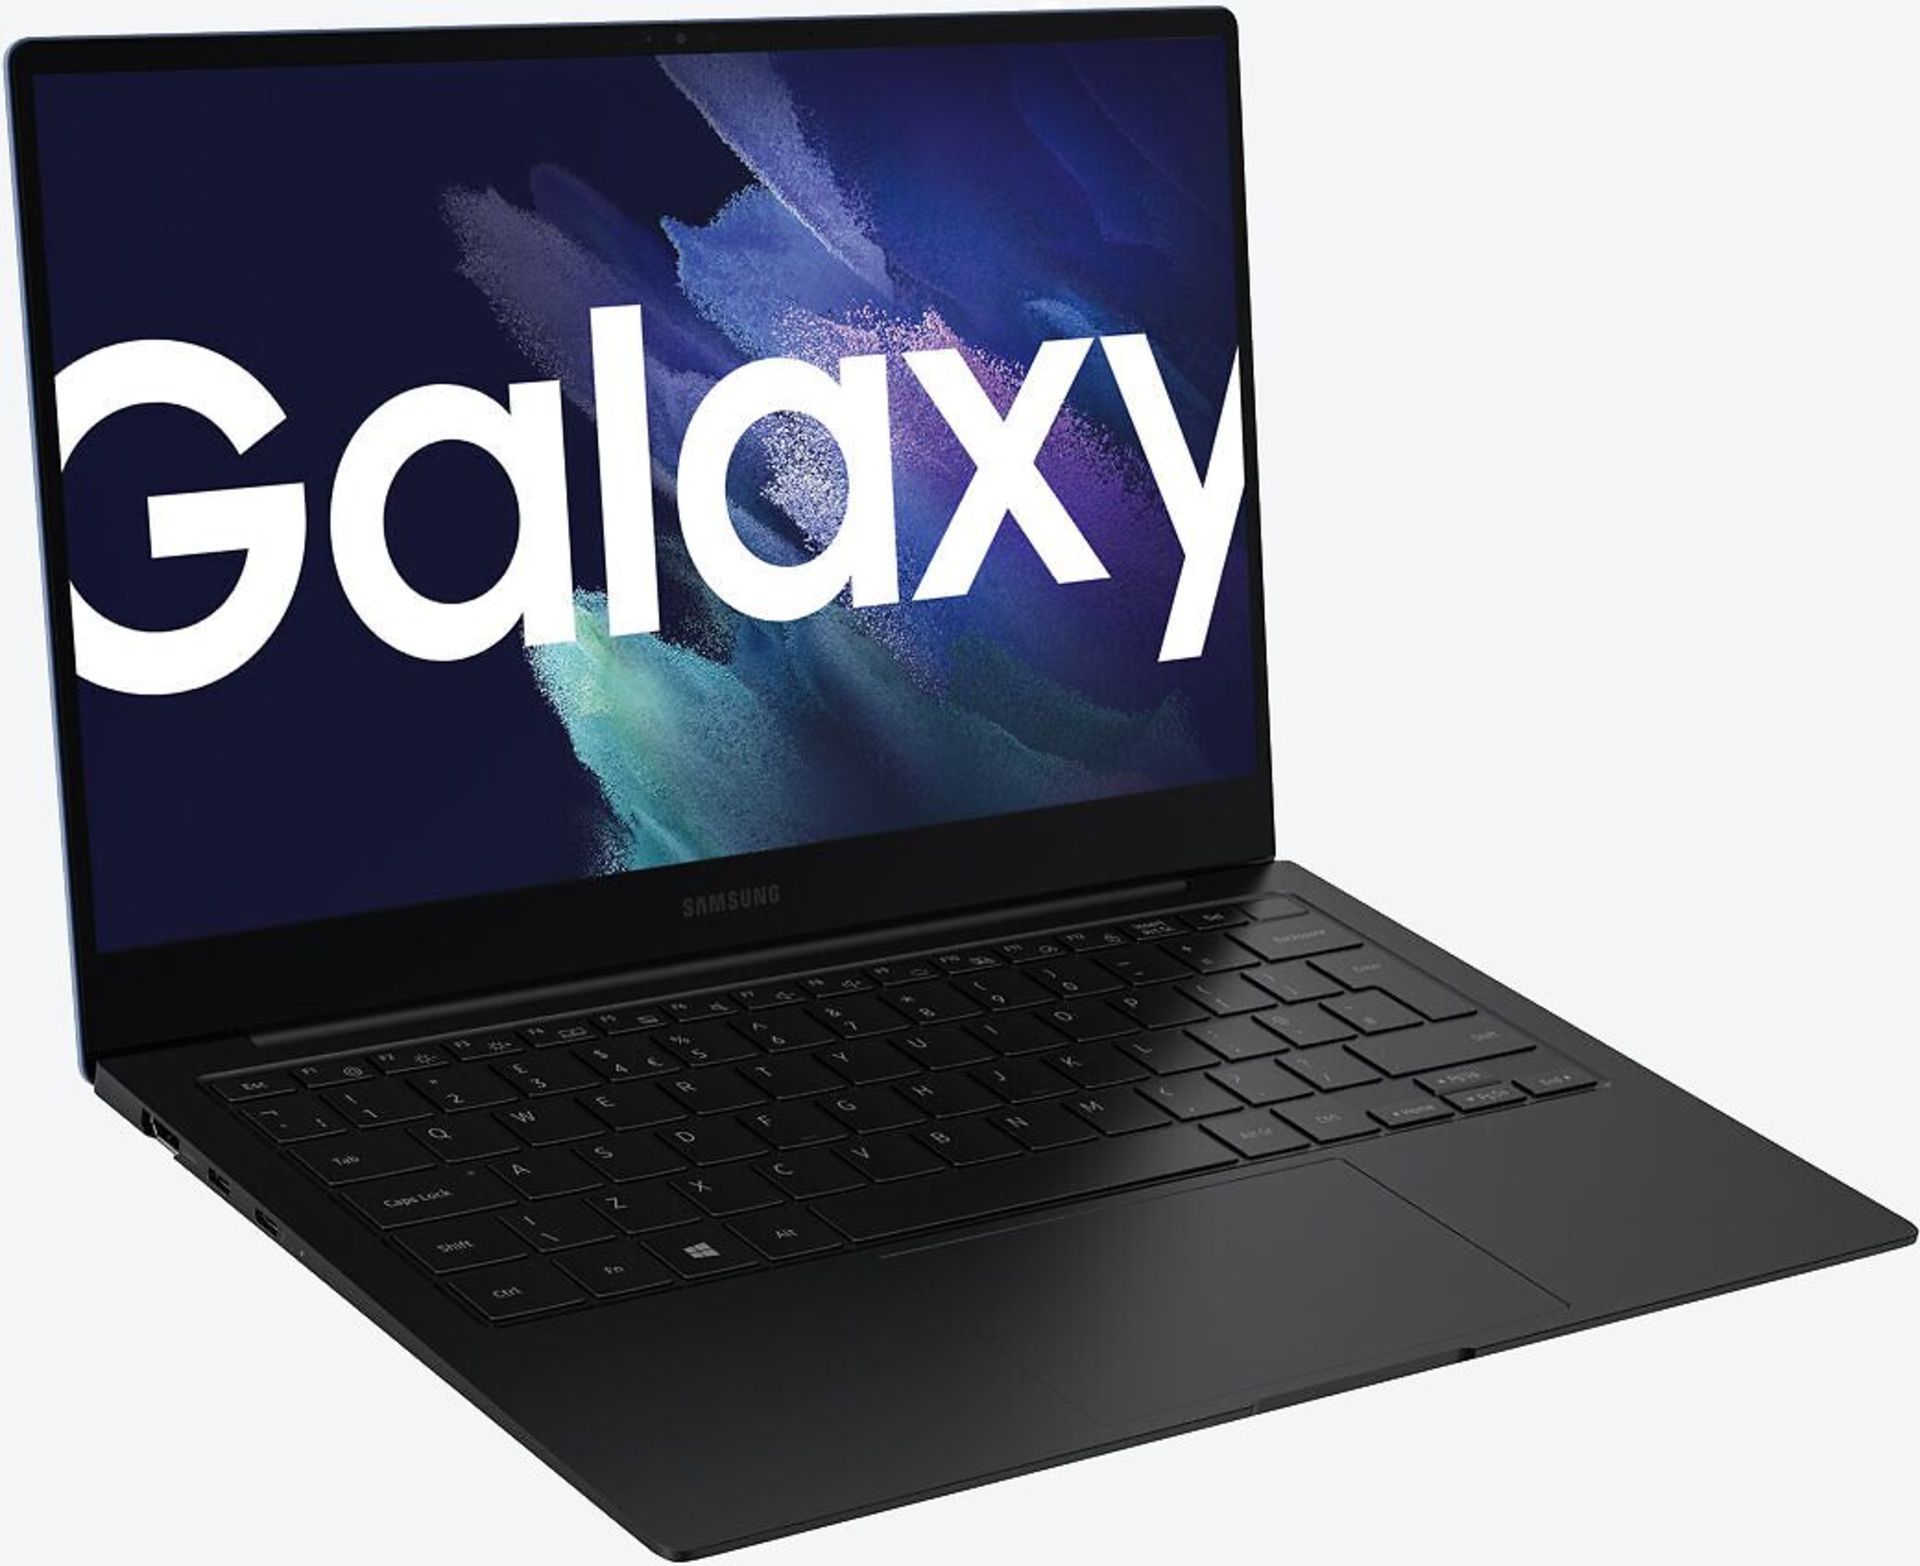 BRAND NEW FACTORY SEALED SAMSUNG Galaxy Book Pro 13 INCH Laptop. RRP £699. Intel Core i5, 8GB RAM, - Image 2 of 6